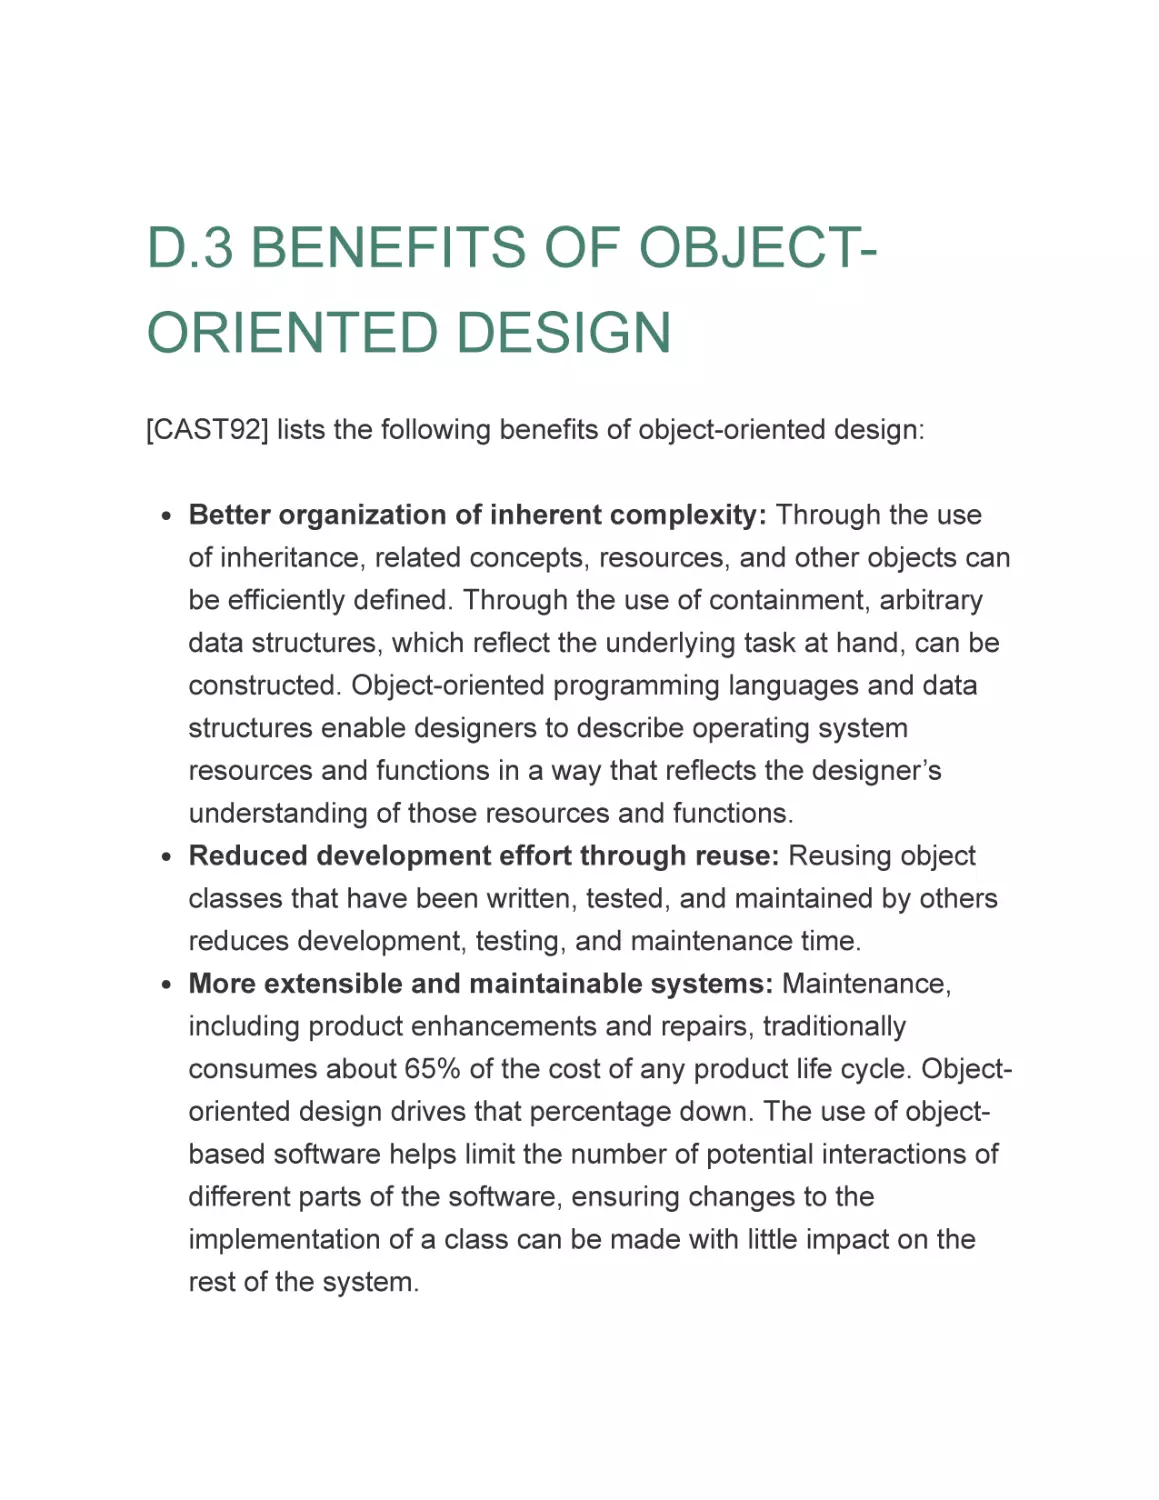 D.3 BENEFITS OF OBJECT-ORIENTED DESIGN